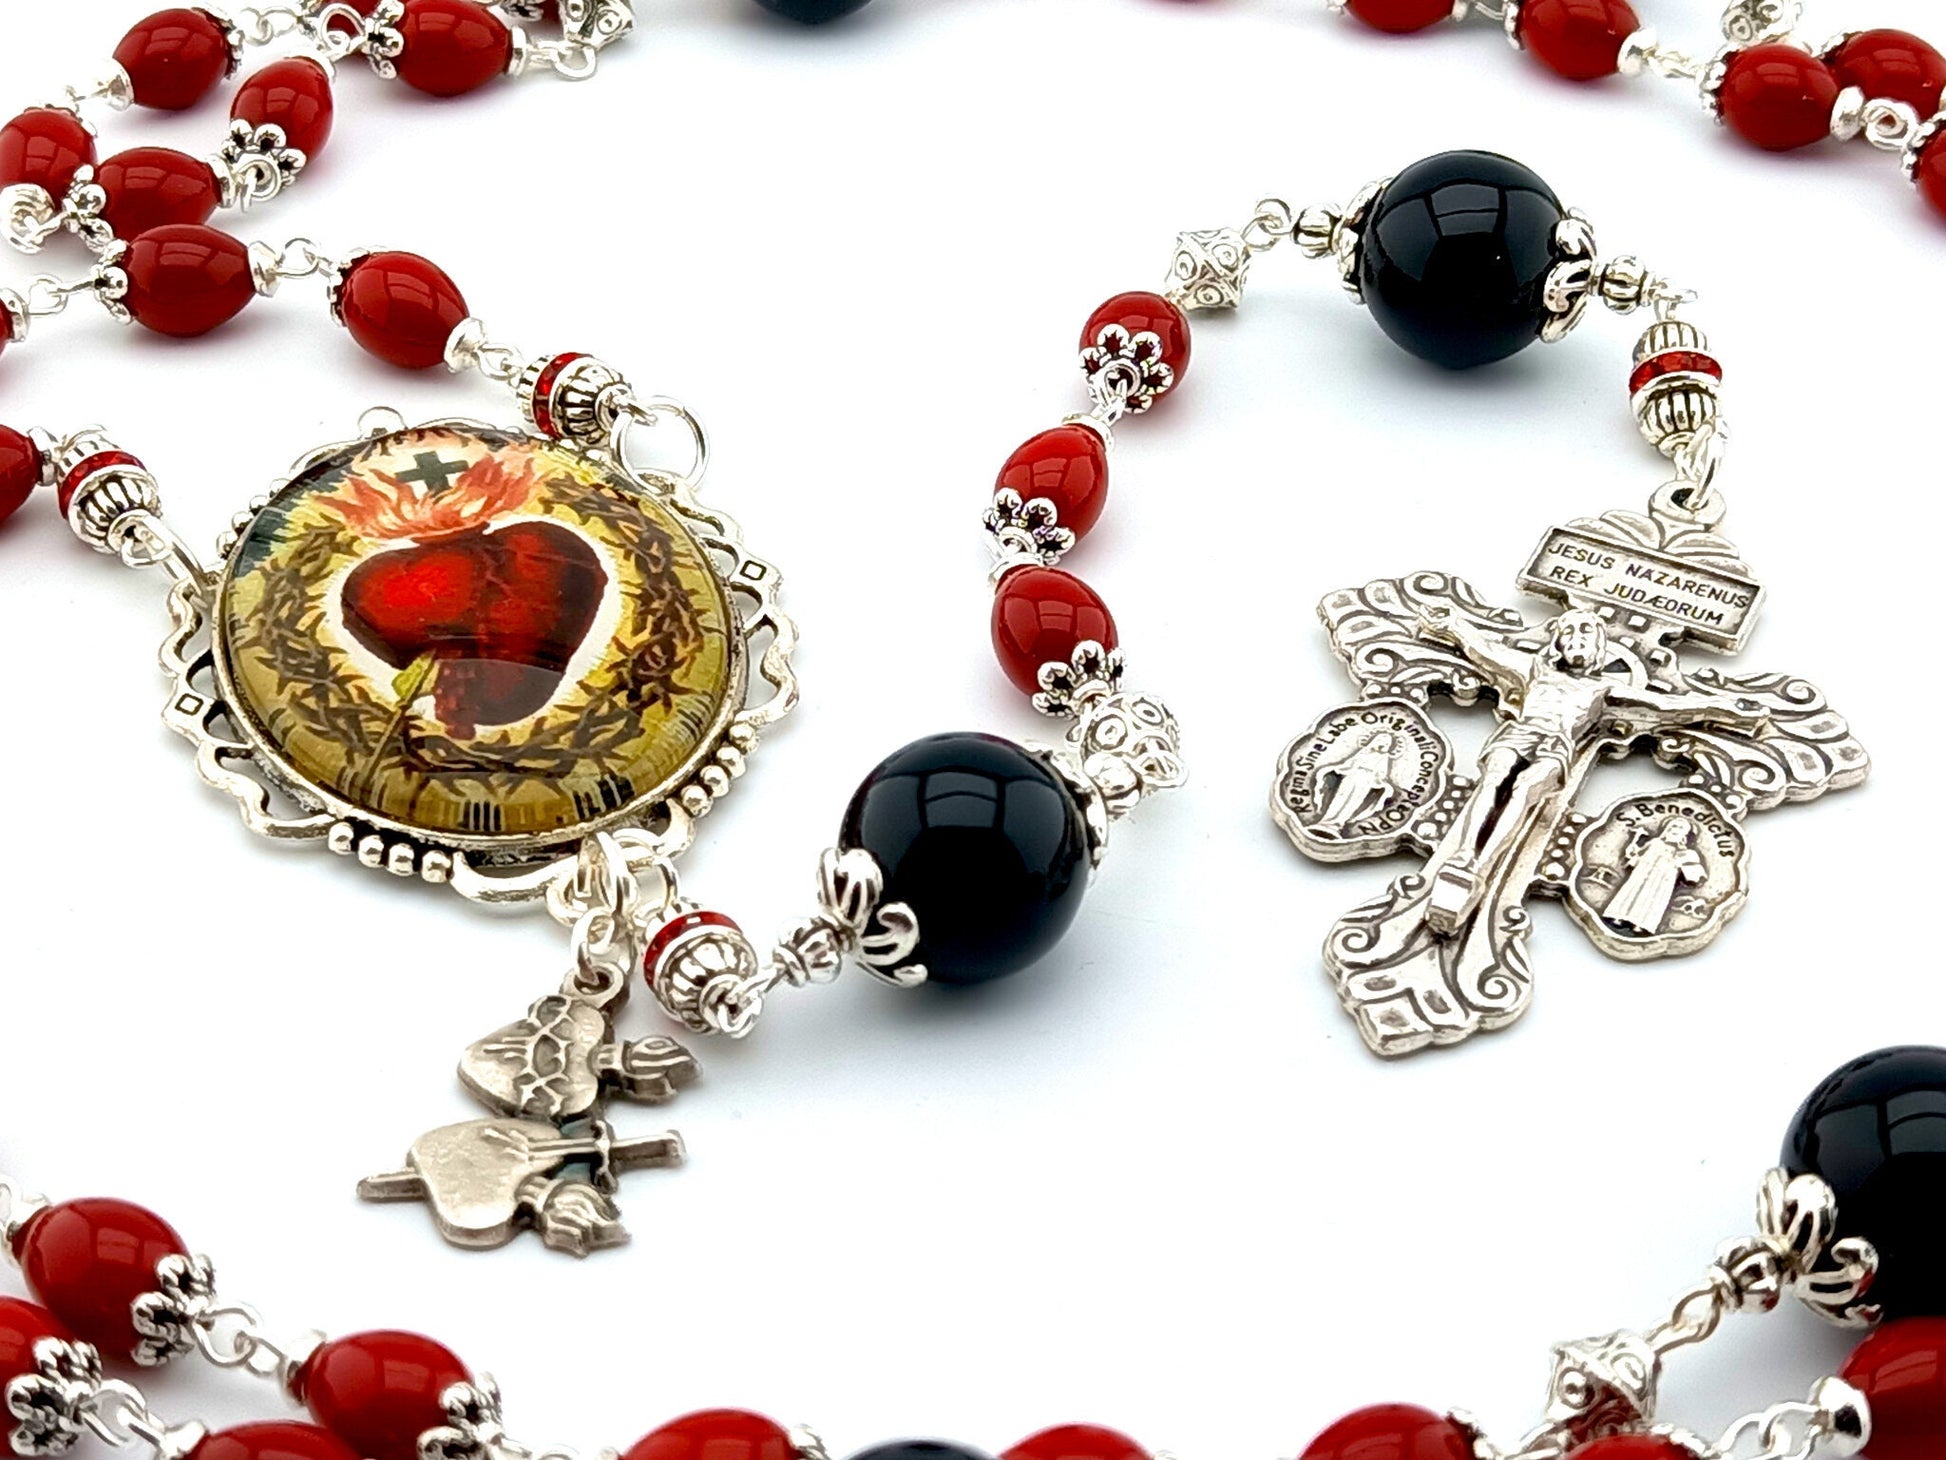 Sacred Heart of Jesus unique rosary beads with red and black glass beads, silver bead caps pardon crucifix and large centre medal.